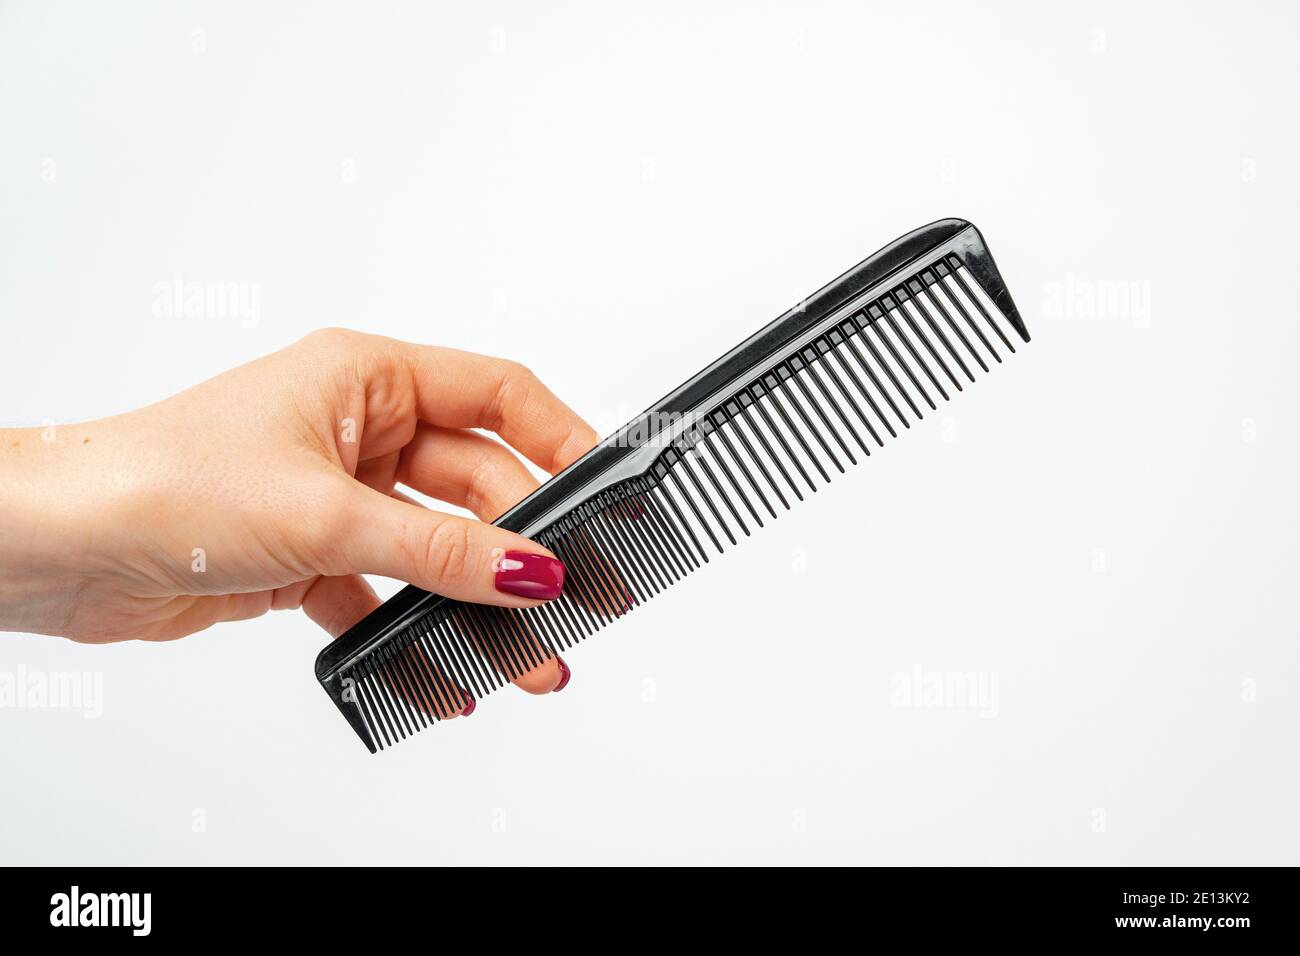 Female hand holding hair comb against white background Stock Photo - Alamy